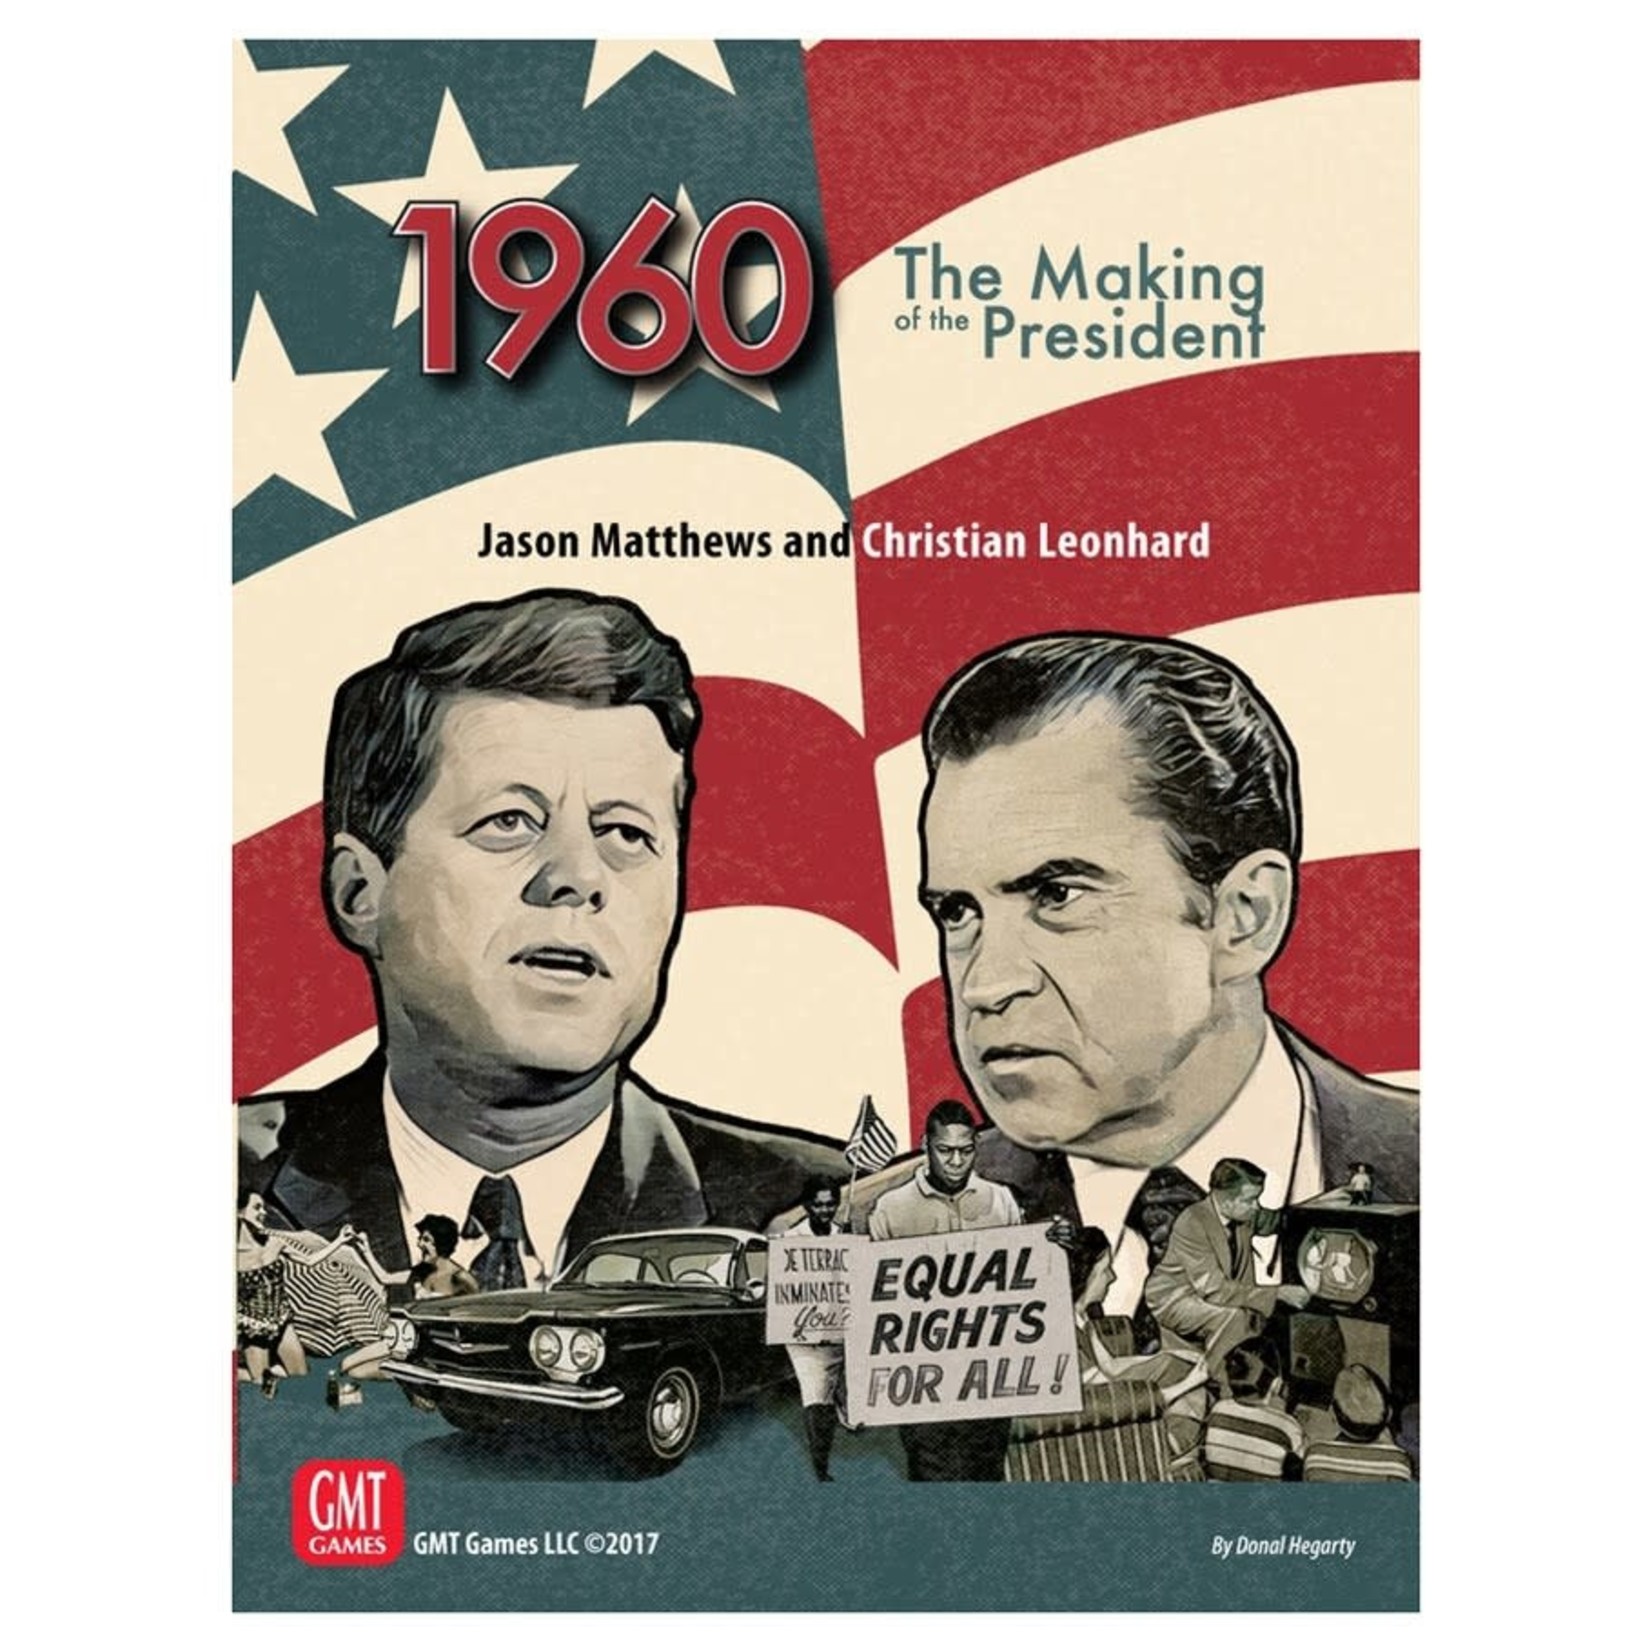 GMT 1960: The Making of the President